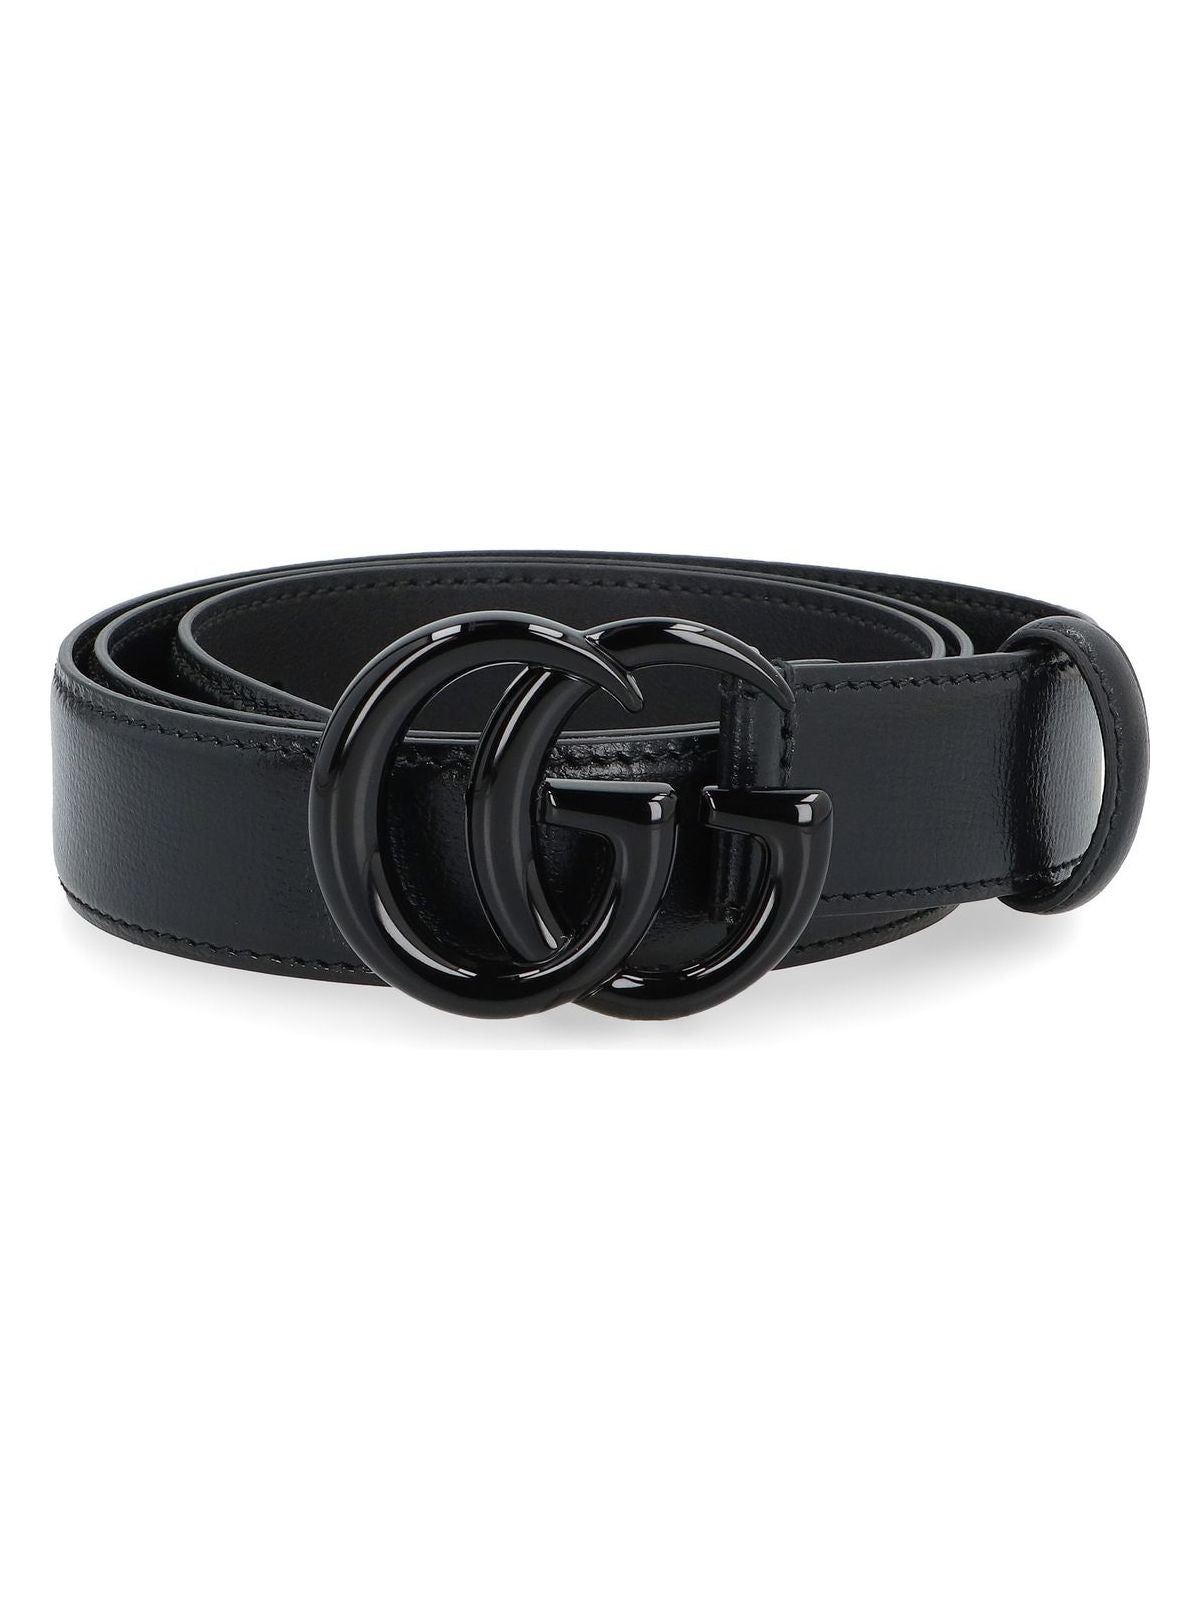 1000 GUCCI LEATHER BELT WITH INTERLOCKING G BUCKLE